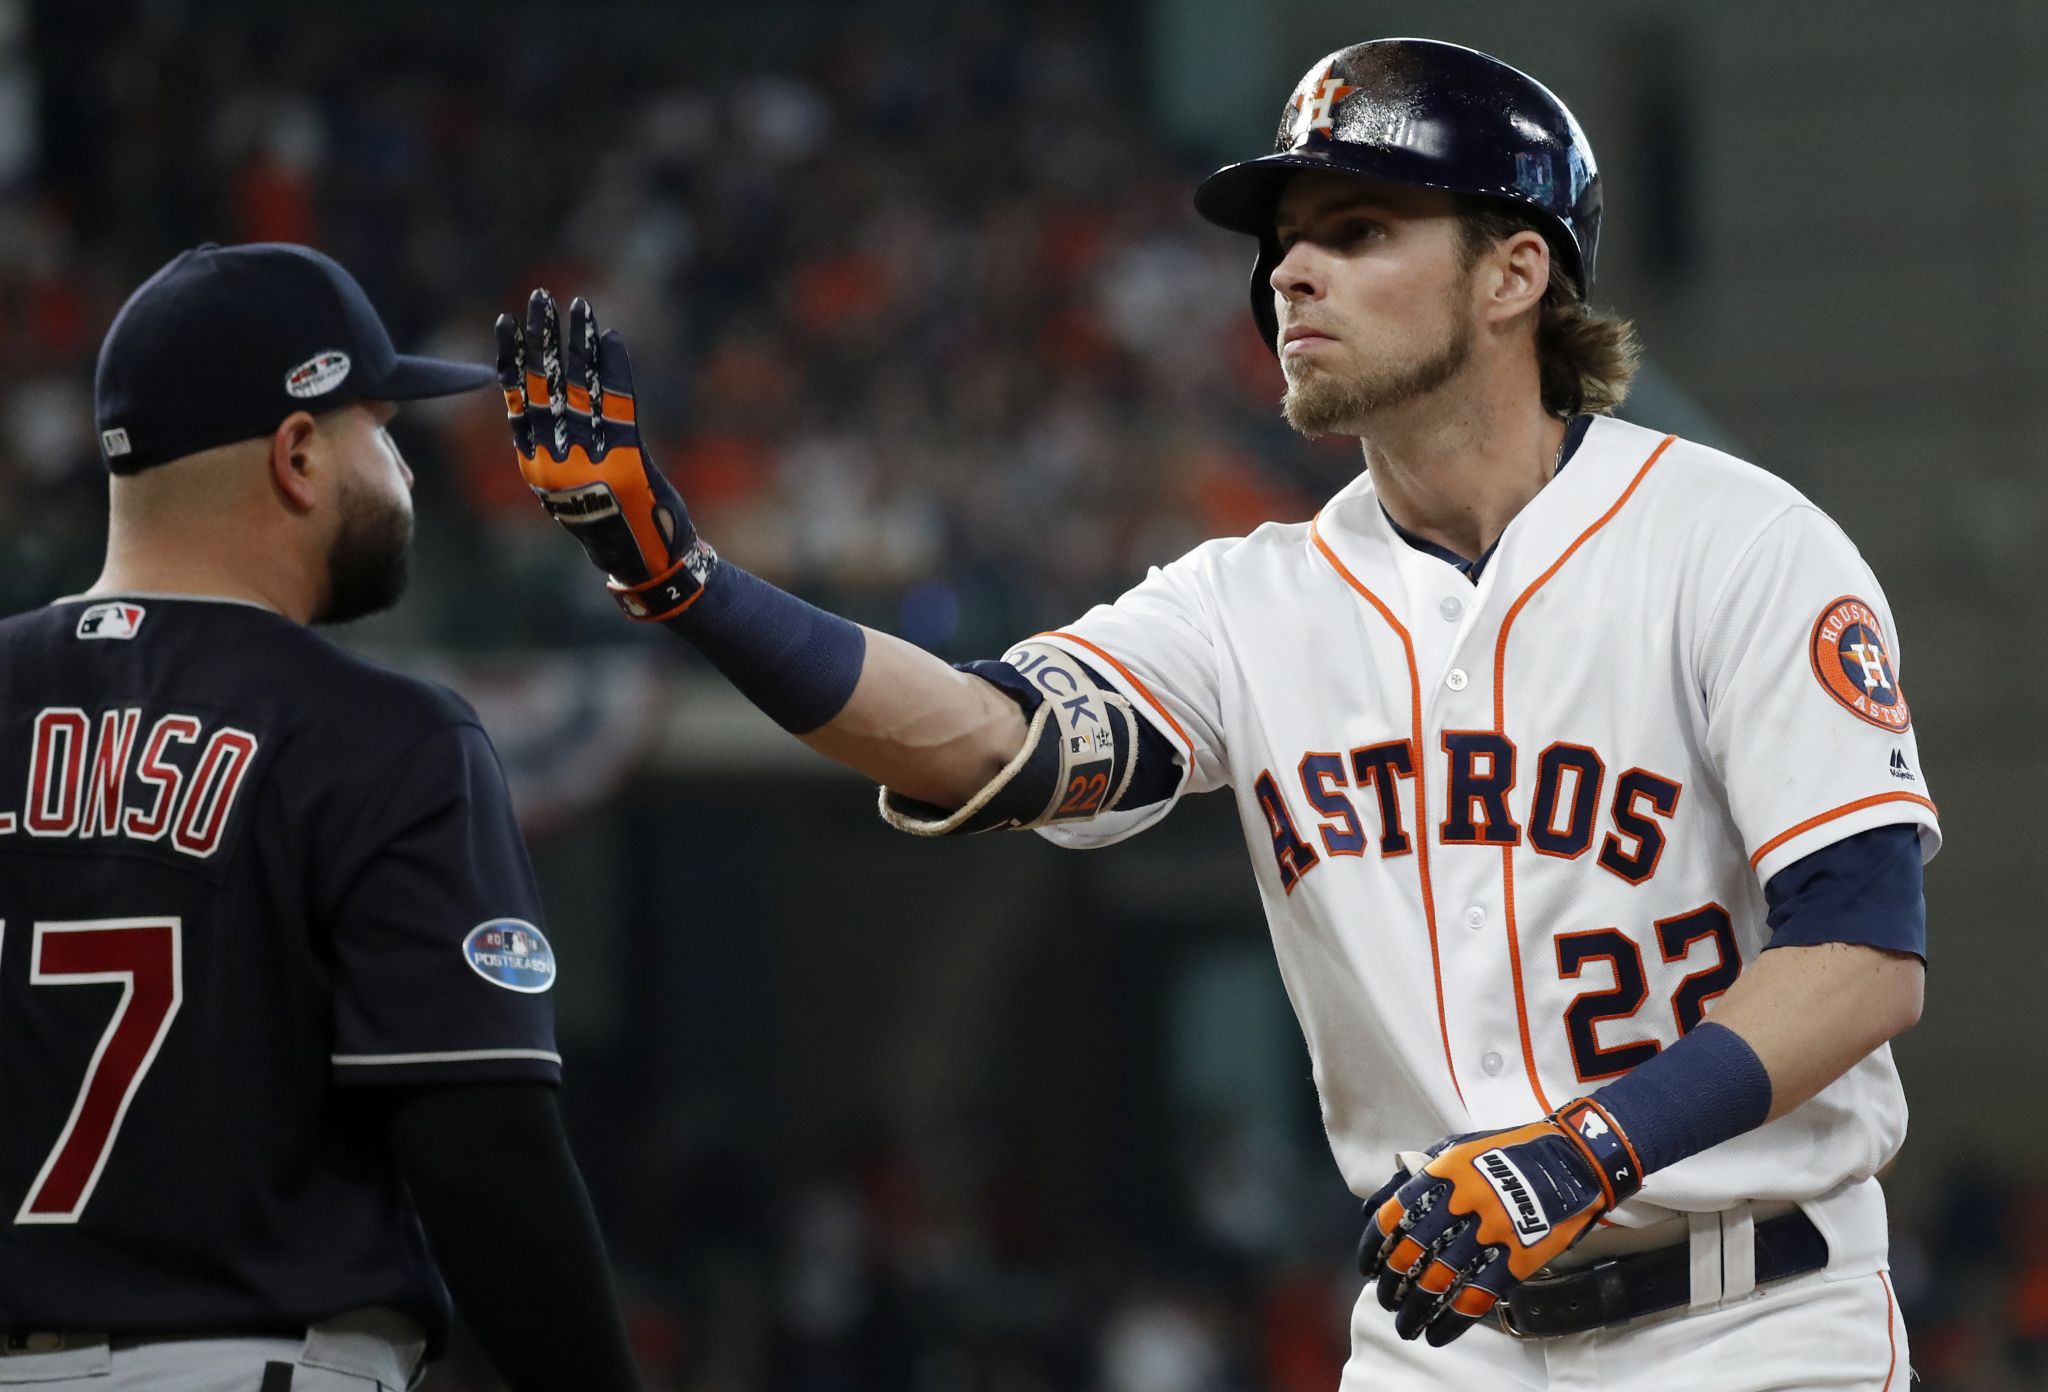 Acknowledging 'things can change,' Josh Reddick hopes to remain with Astros